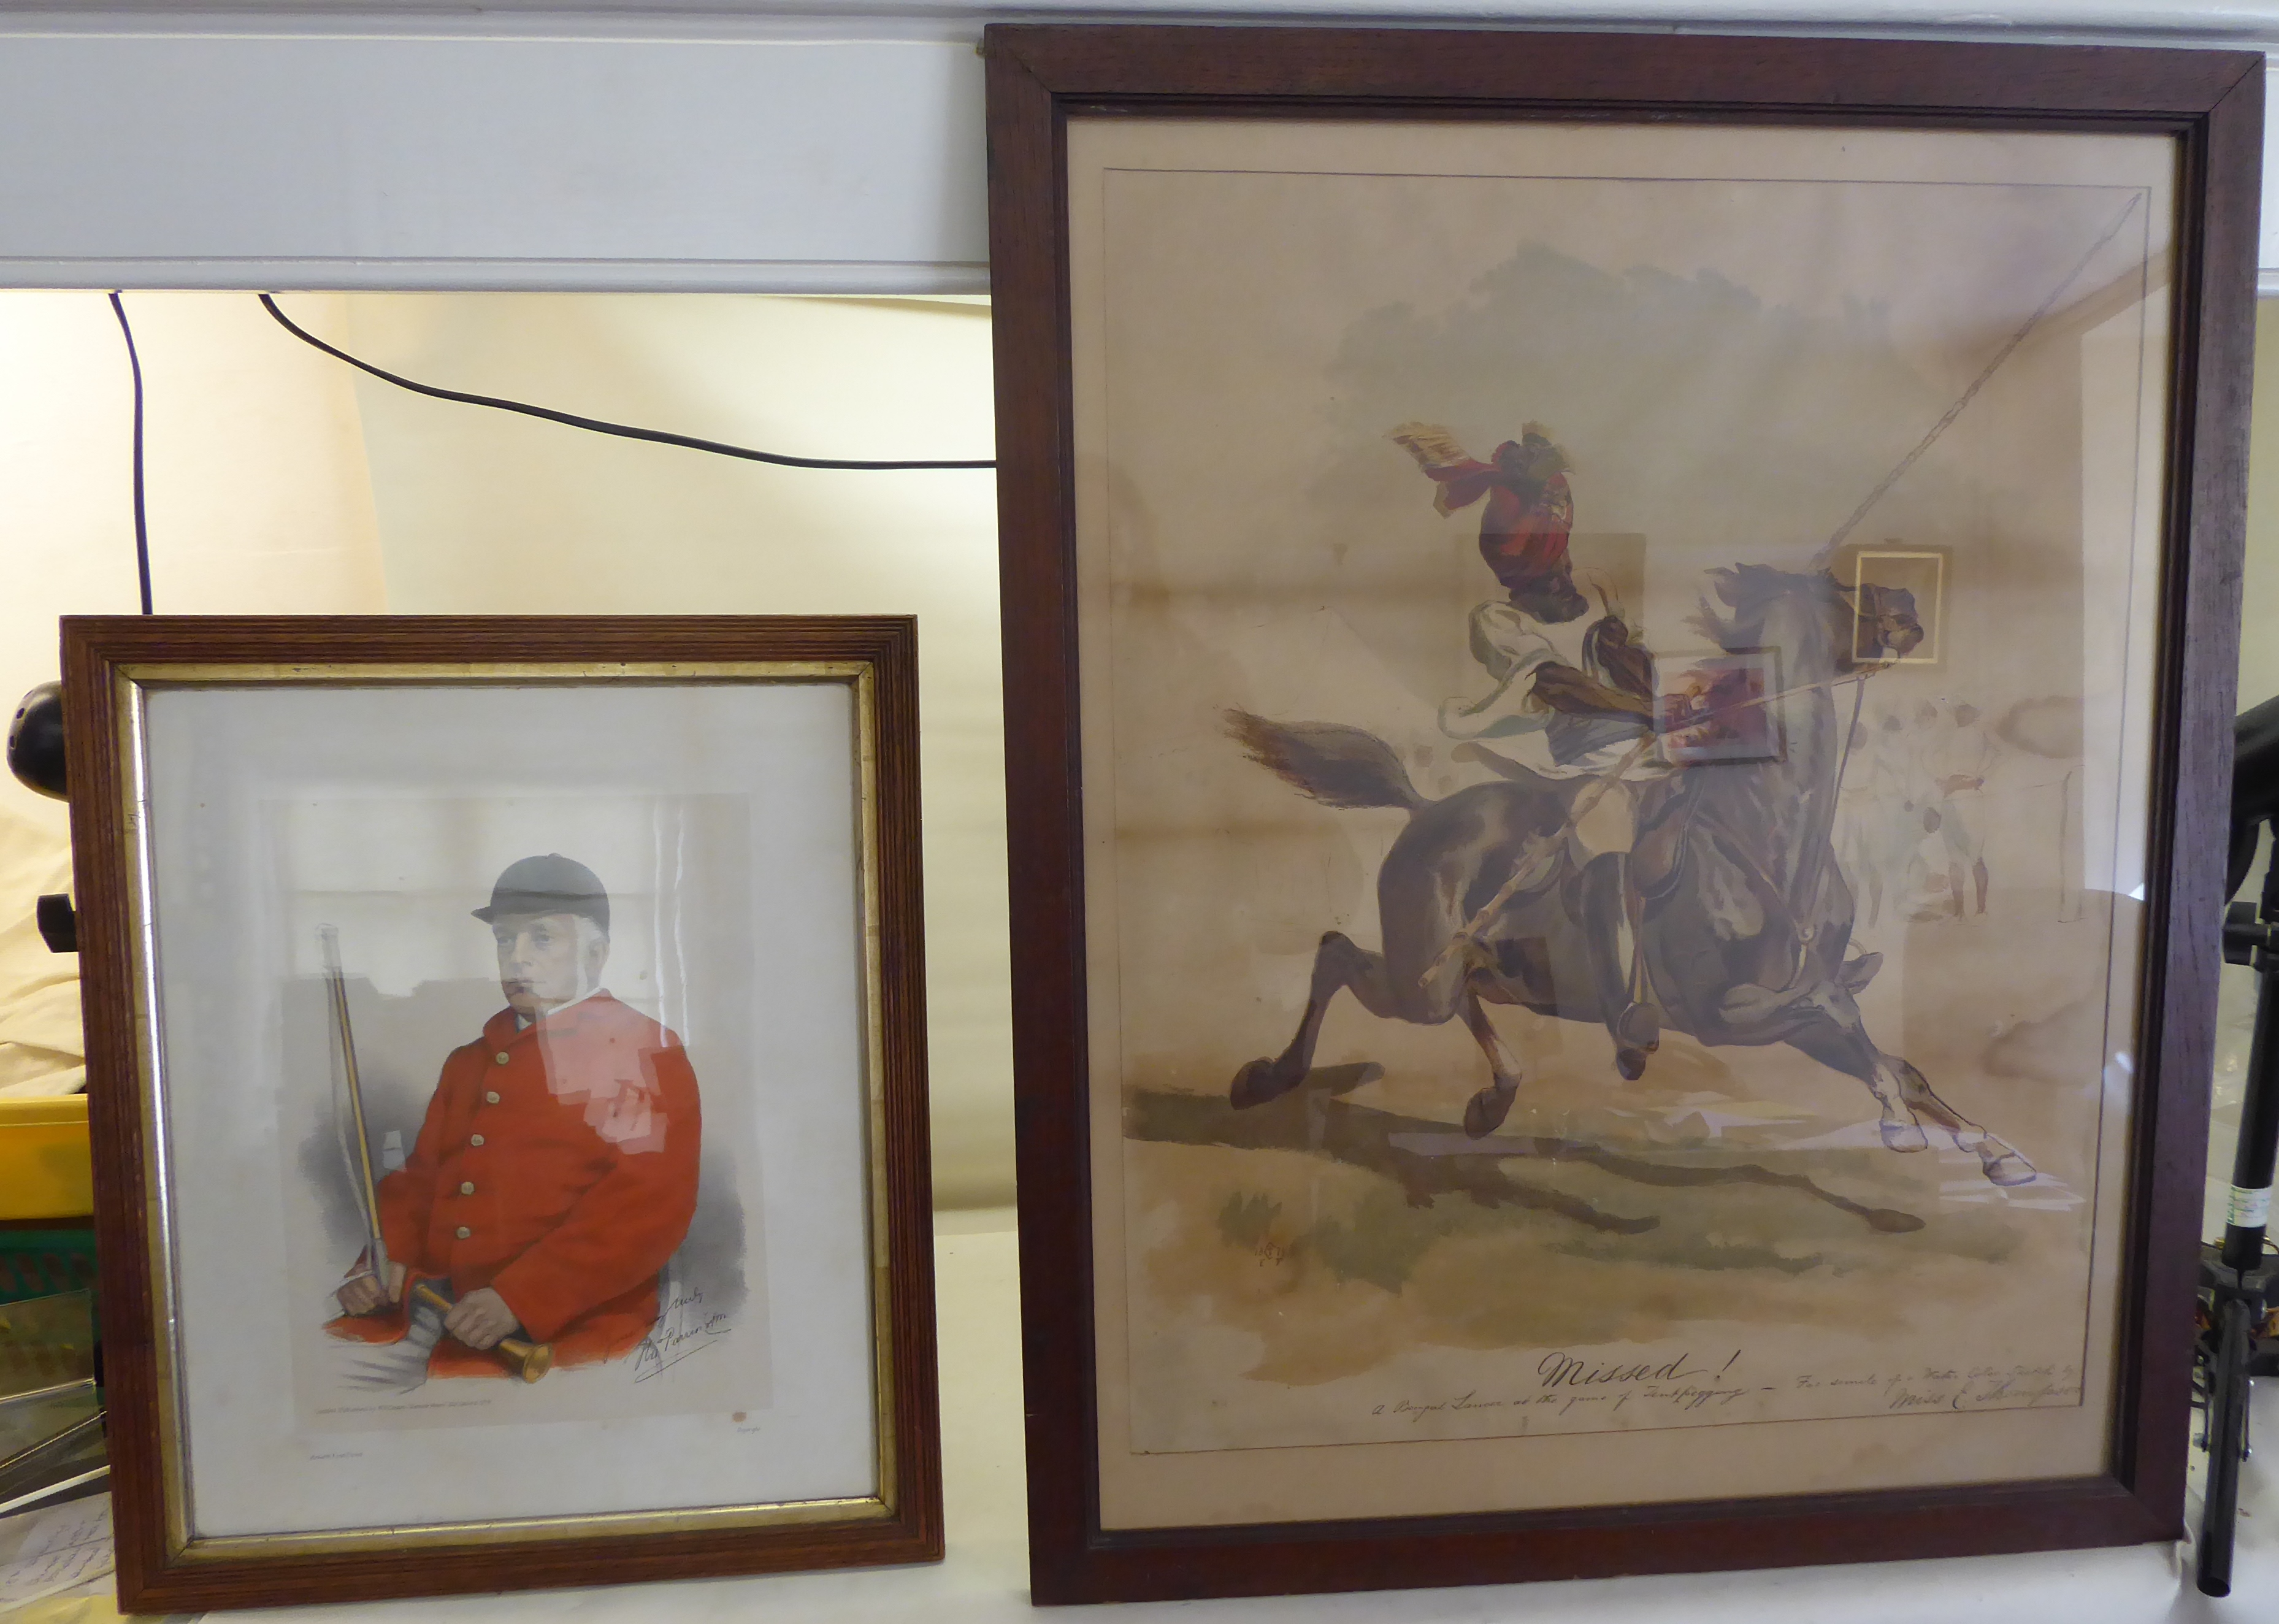 After C THOMPSON; a coloured Print of a Bengal Lancer tent pegging, 25" (64cms) x 20" (51cms), and